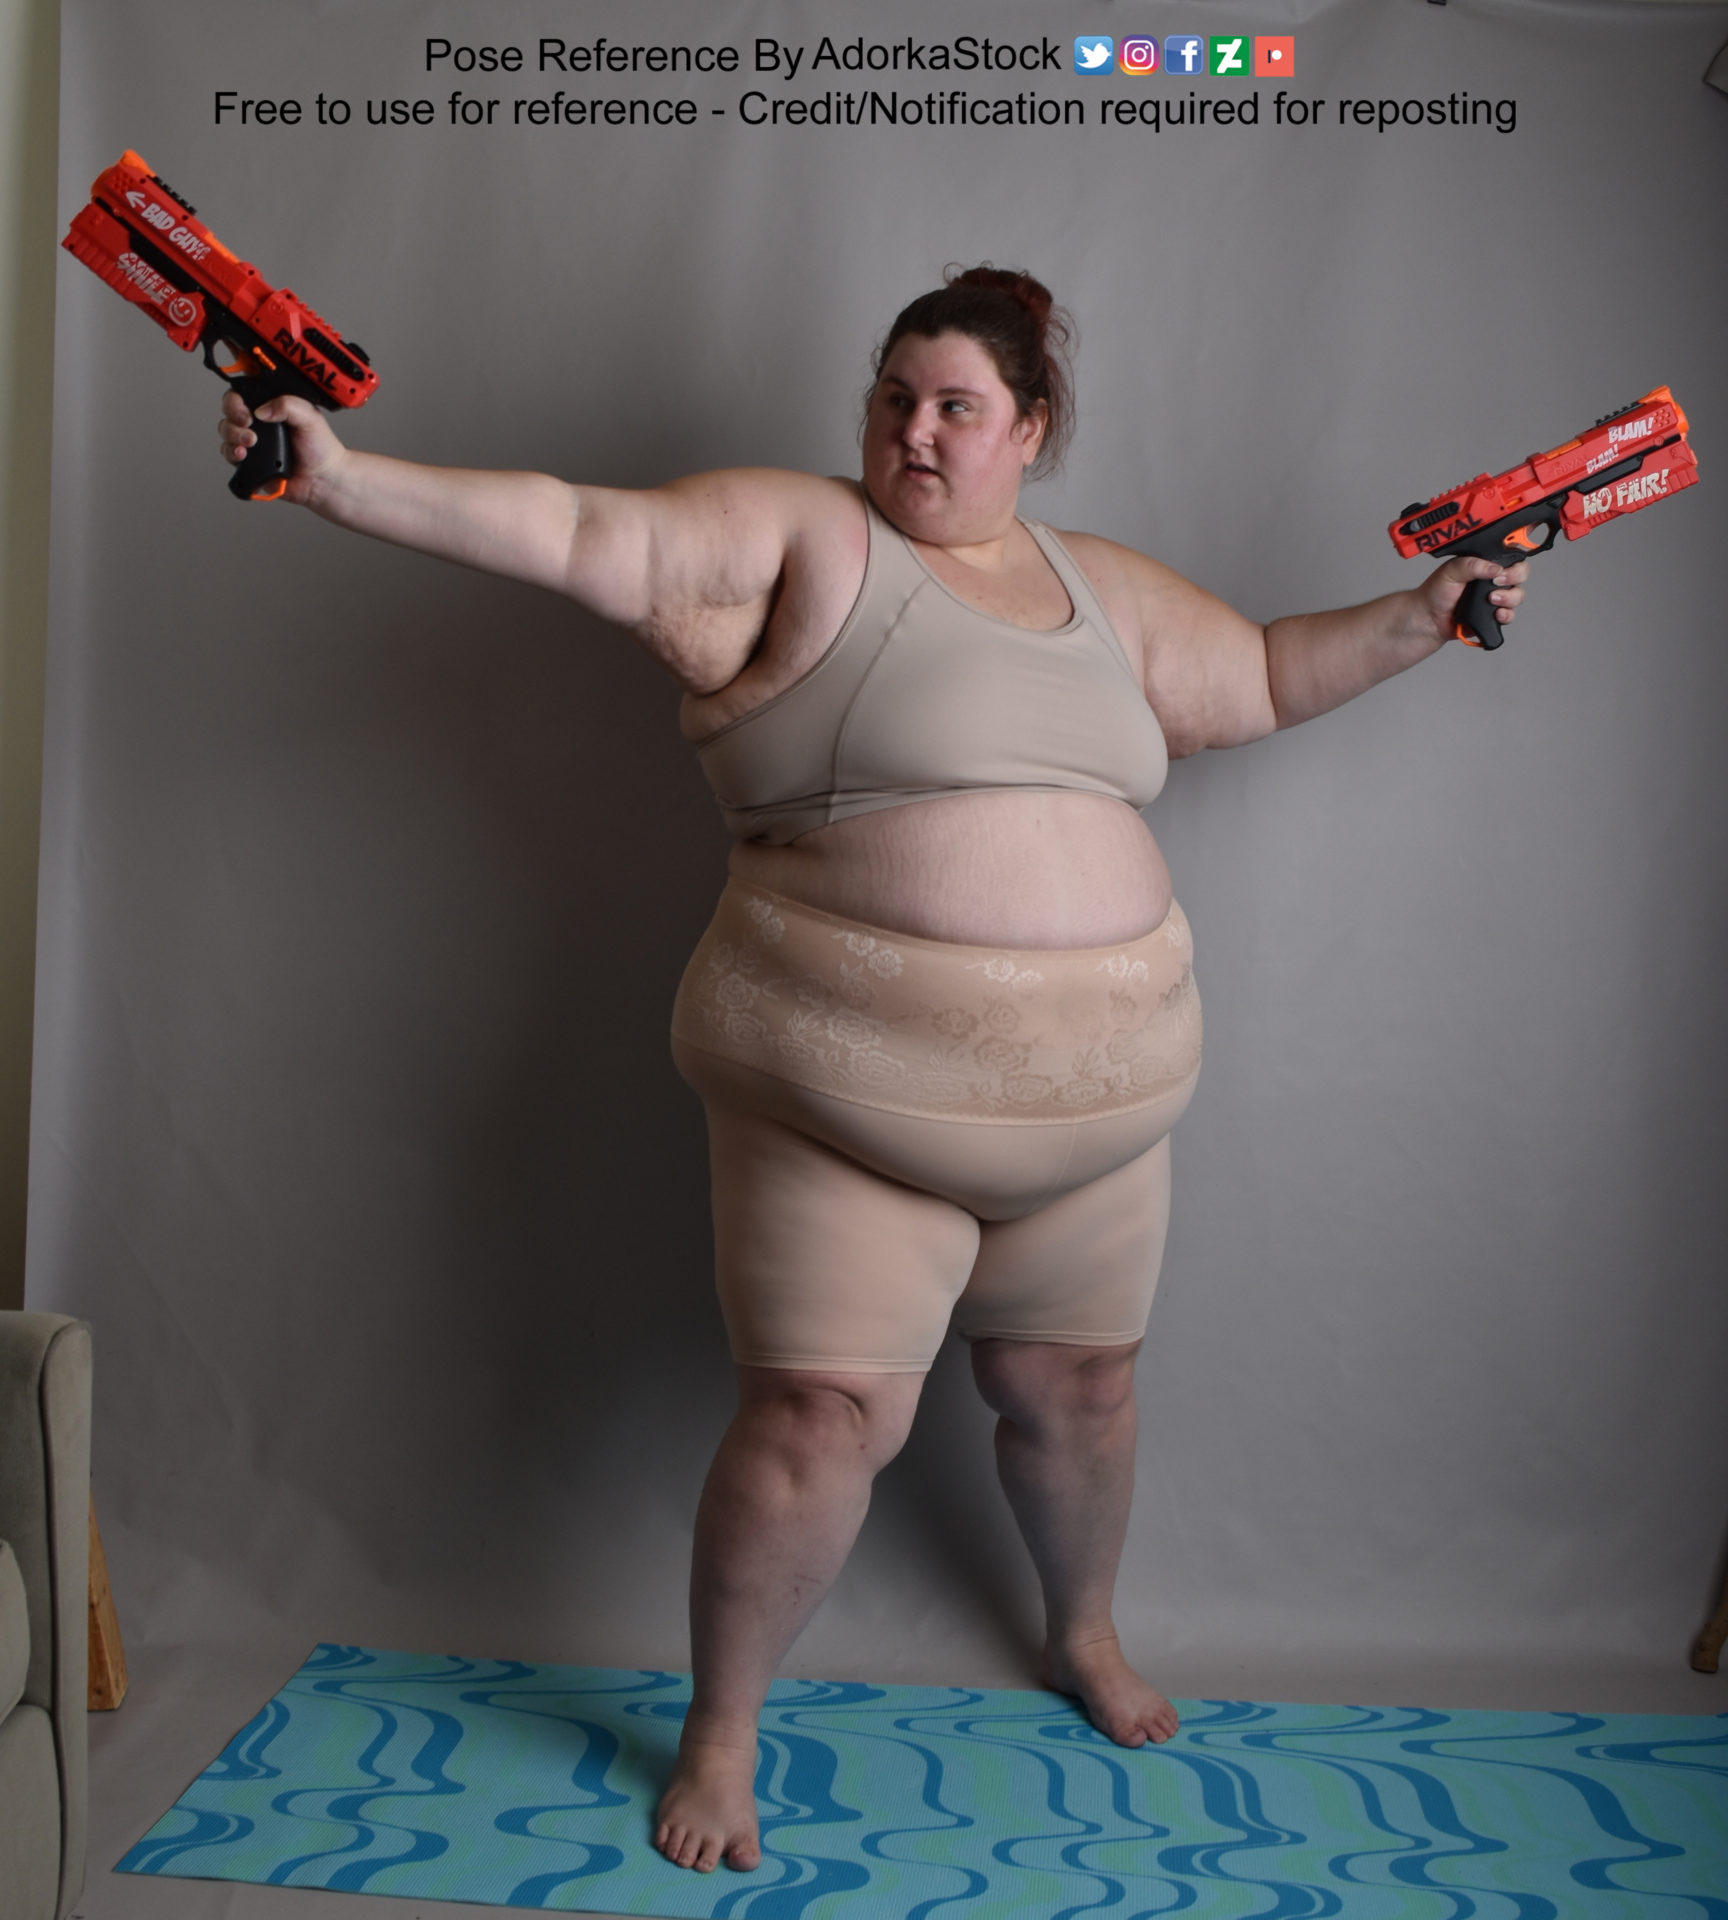 Fat female pose reference model shooting two nerf guns